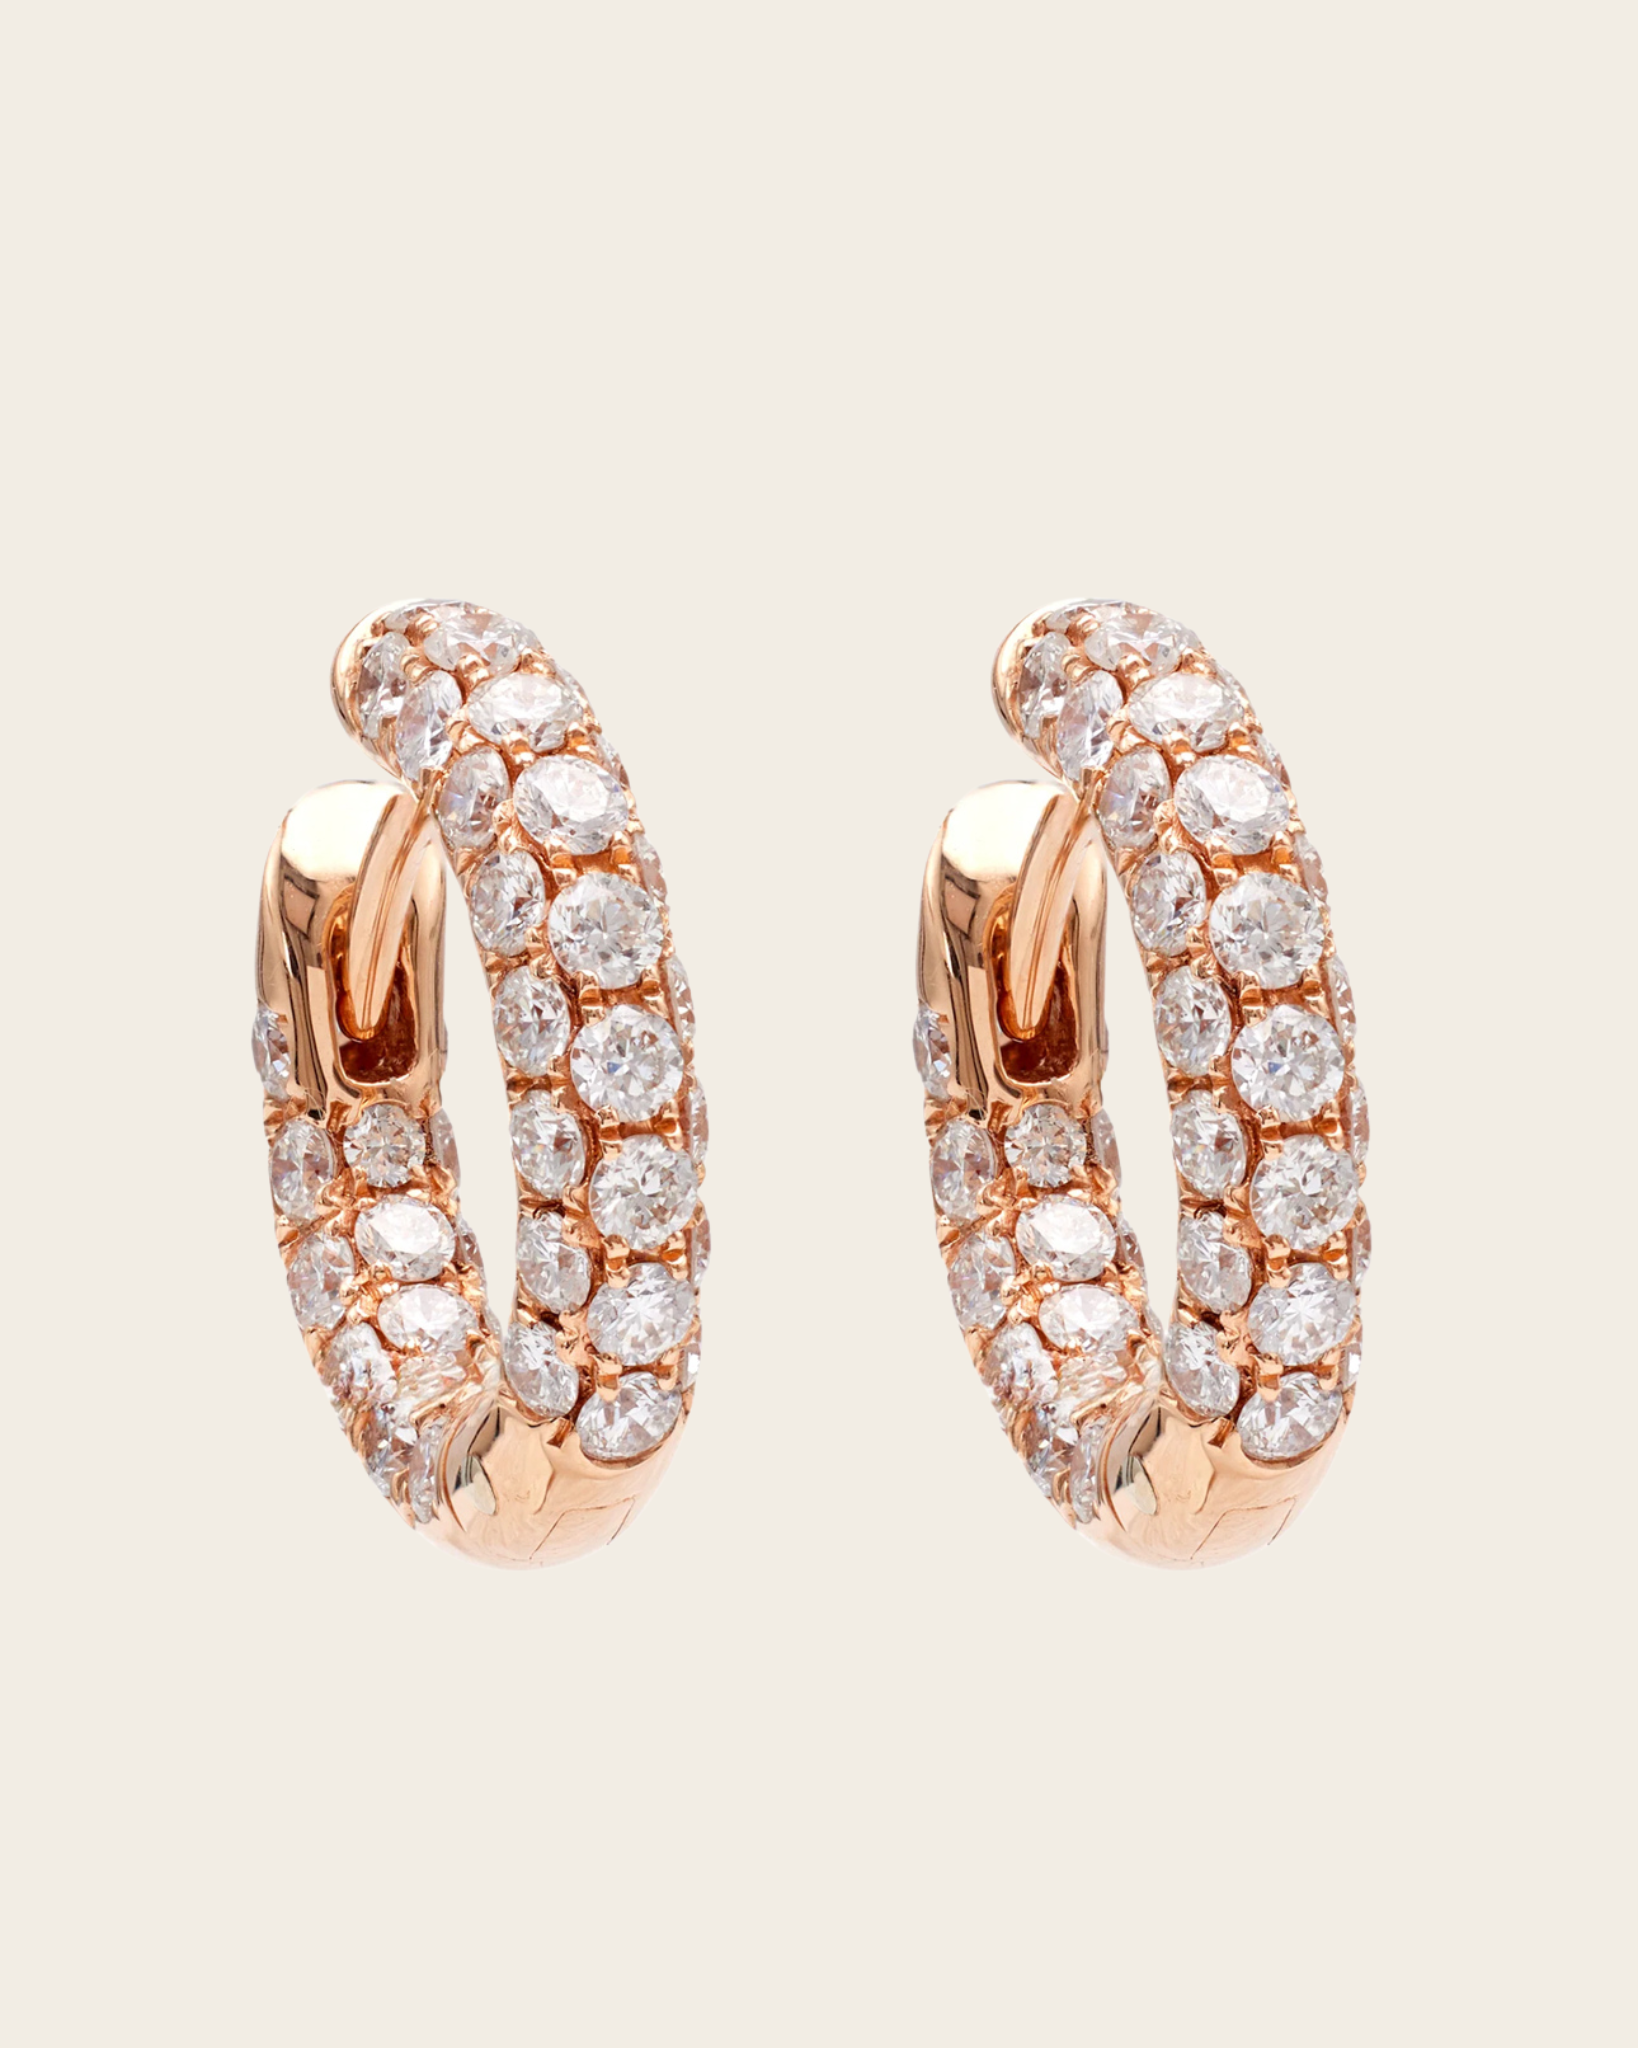 Diamond pave
3 sided earrings in rose gold